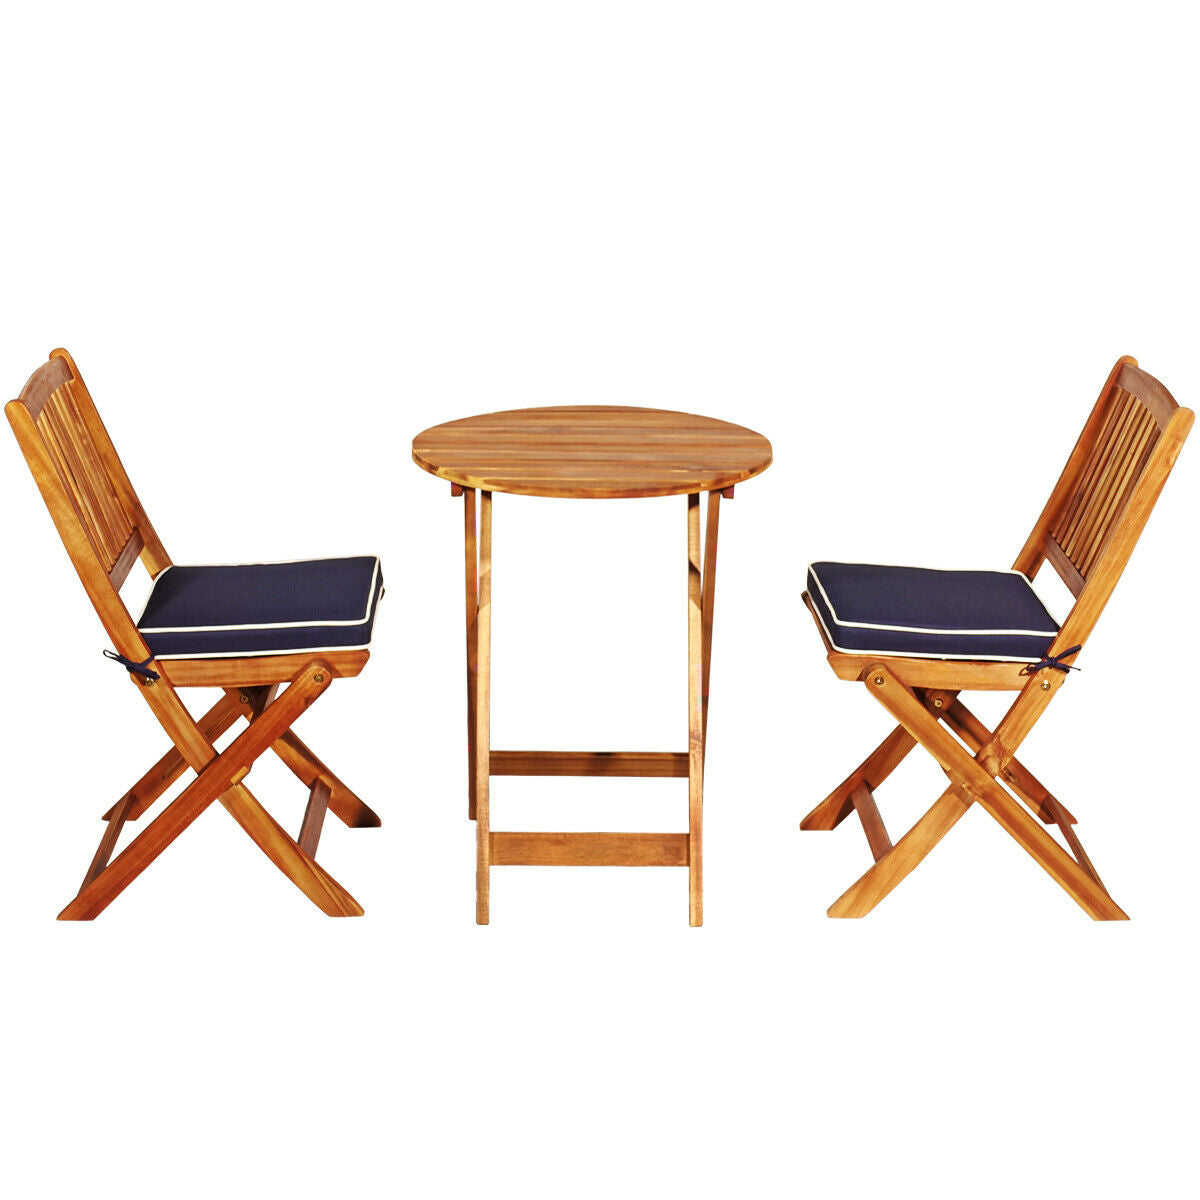 3 Pcs Patio Set - Wooden Bistro Set with Cushioned